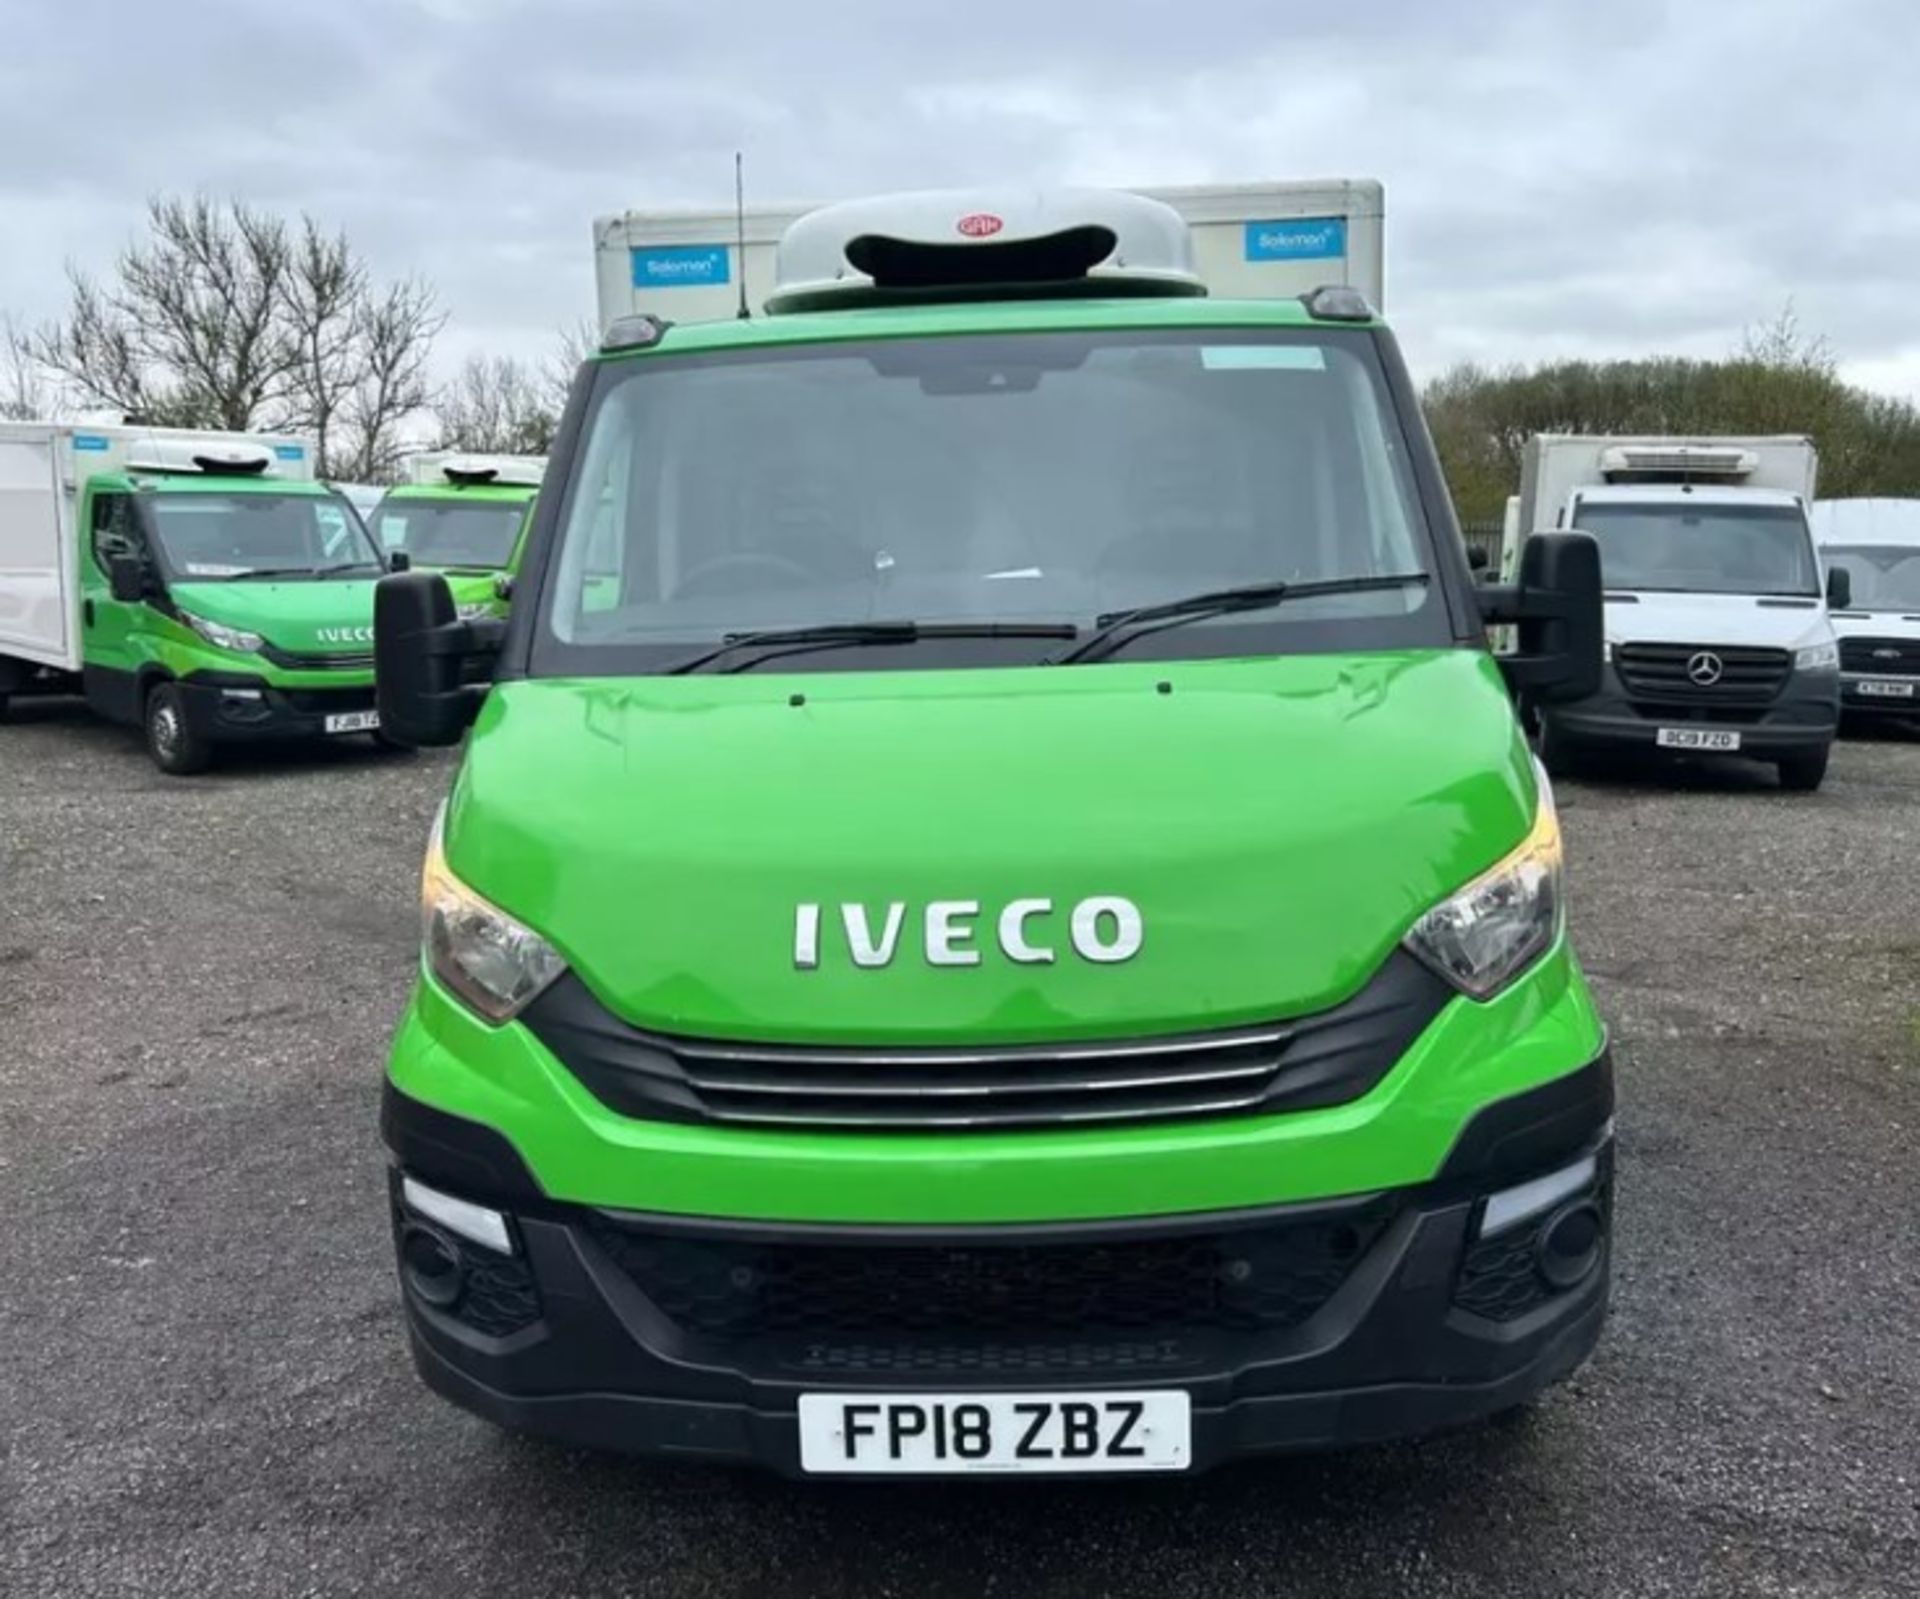 EXCEPTIONAL PERFORMANCE AND VERSATILITY: 2018 IVECO DAILY 35S12 CHASSIS CAB - Image 2 of 10